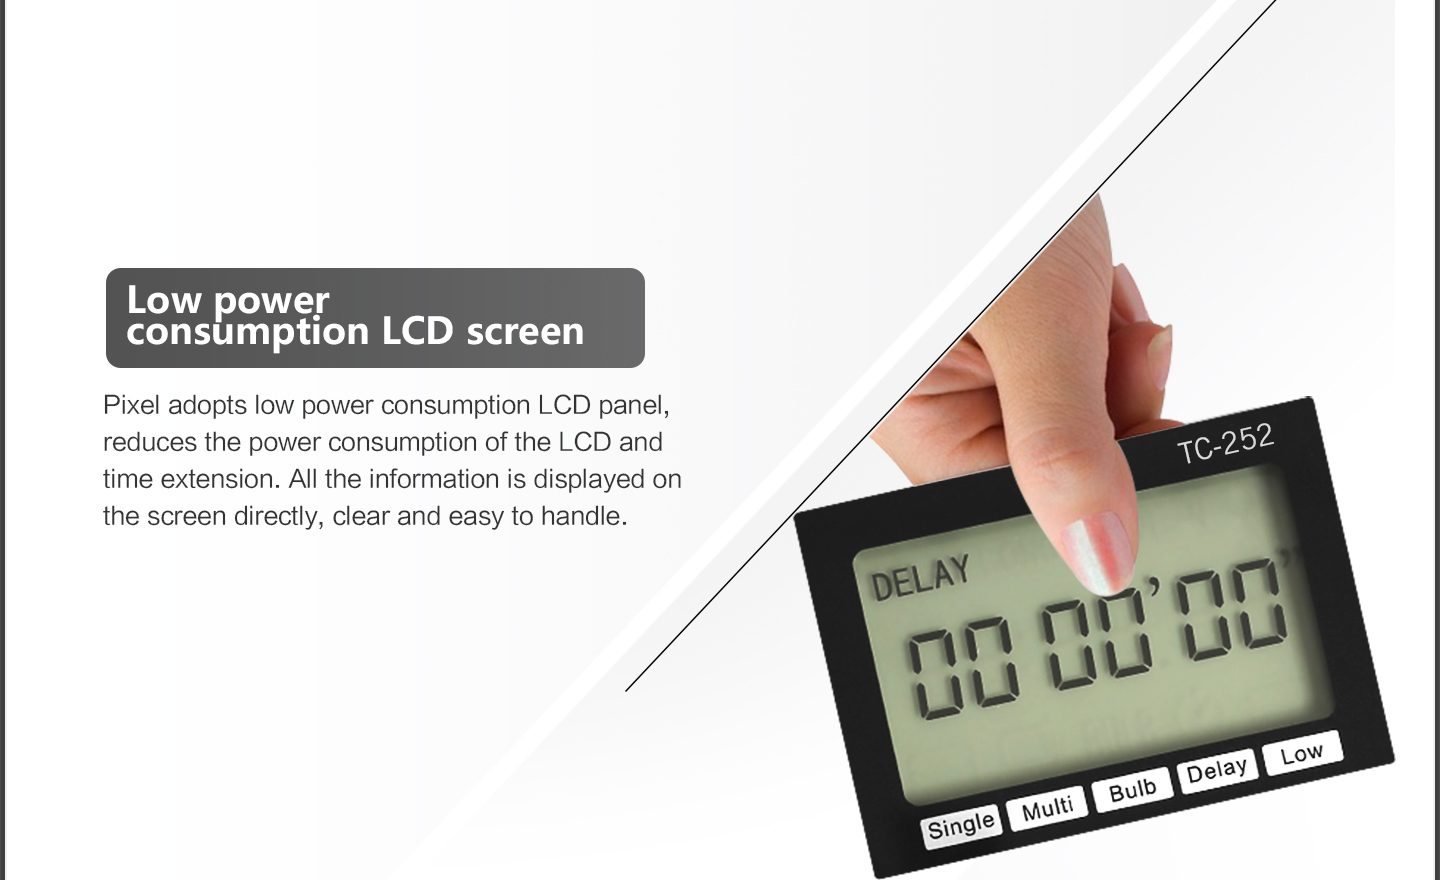 Low power, consumption LCD screen